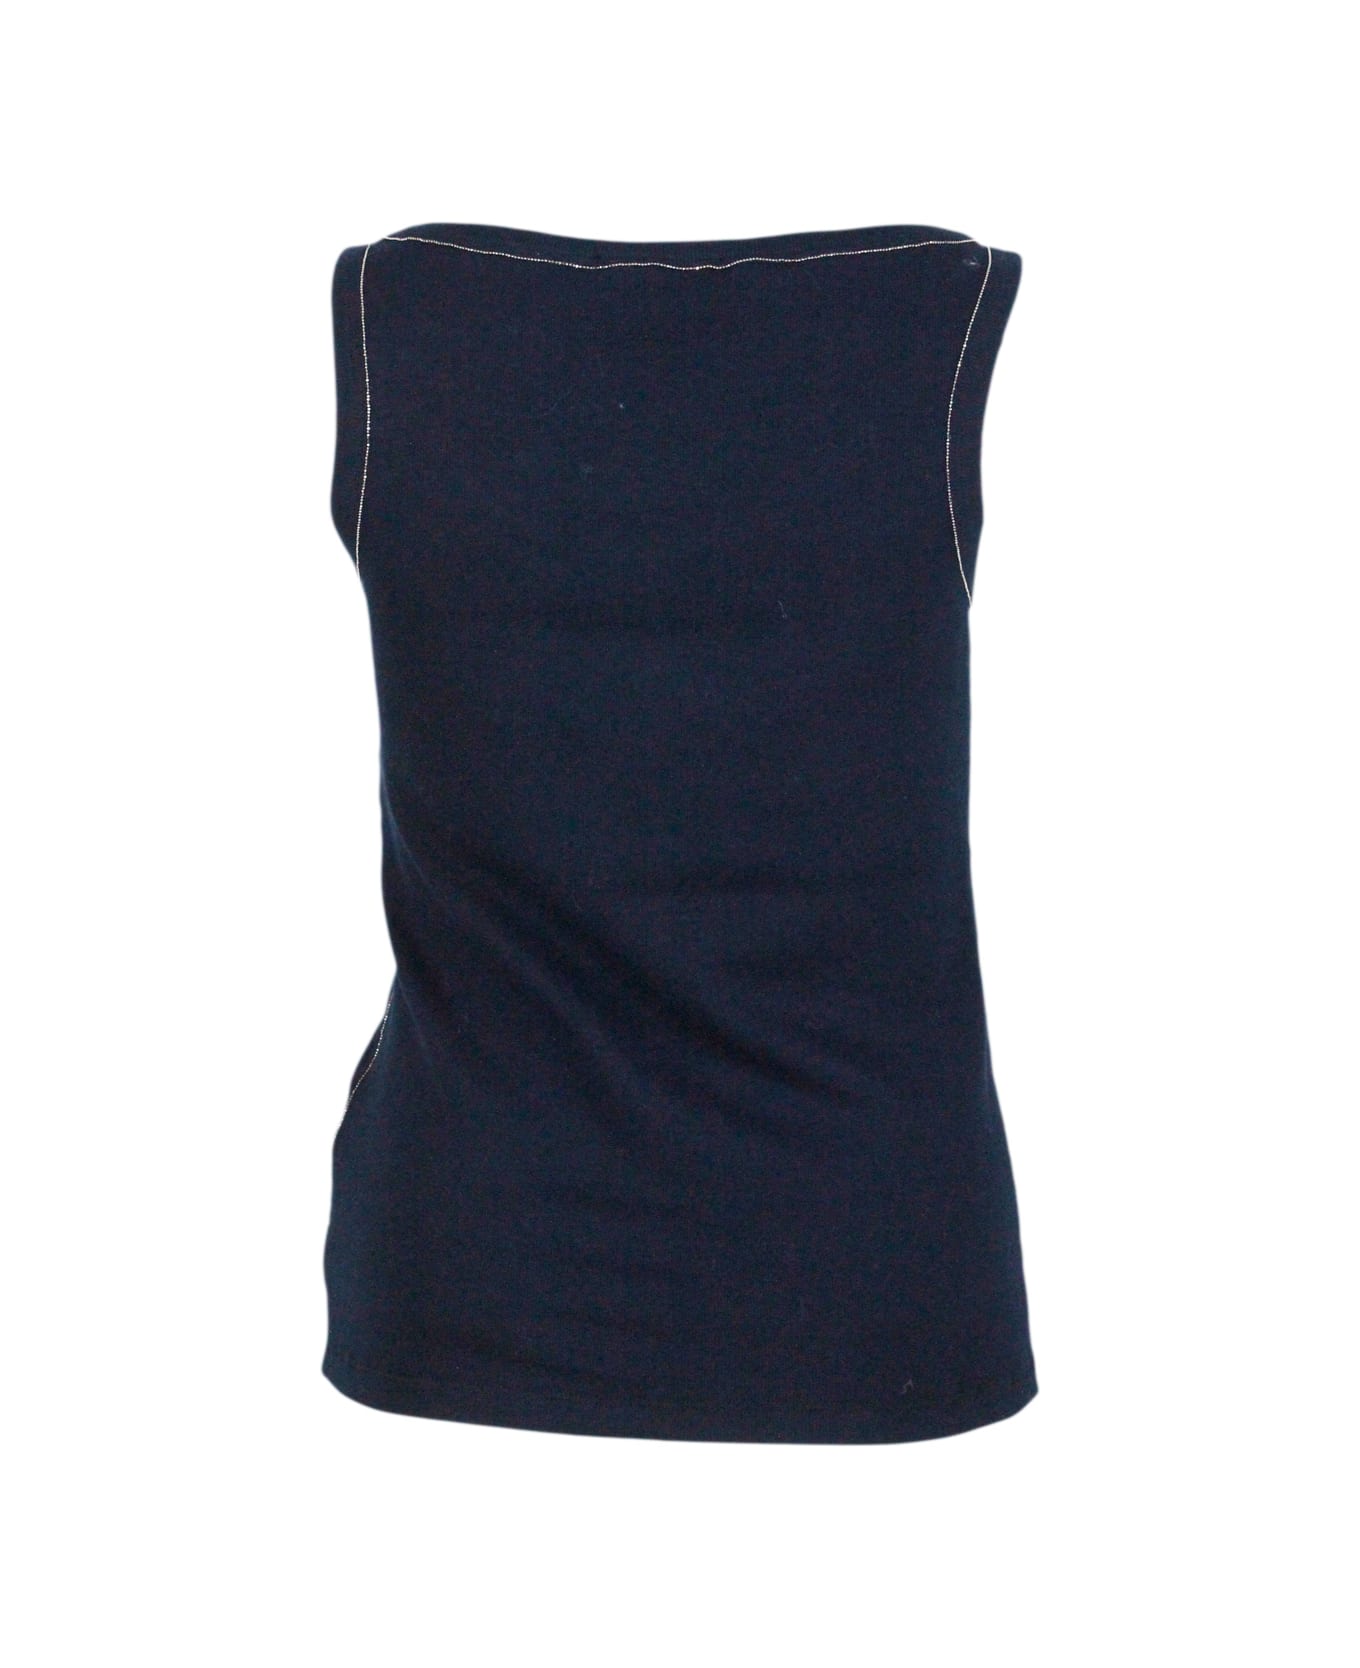 Fabiana Filippi Sleeveless T-shirt, Ribbed Cotton Tank Top With U-neck, Elbow-length Sleeves Embellished With Rows Of Monili On The Neck And Sides - Blu